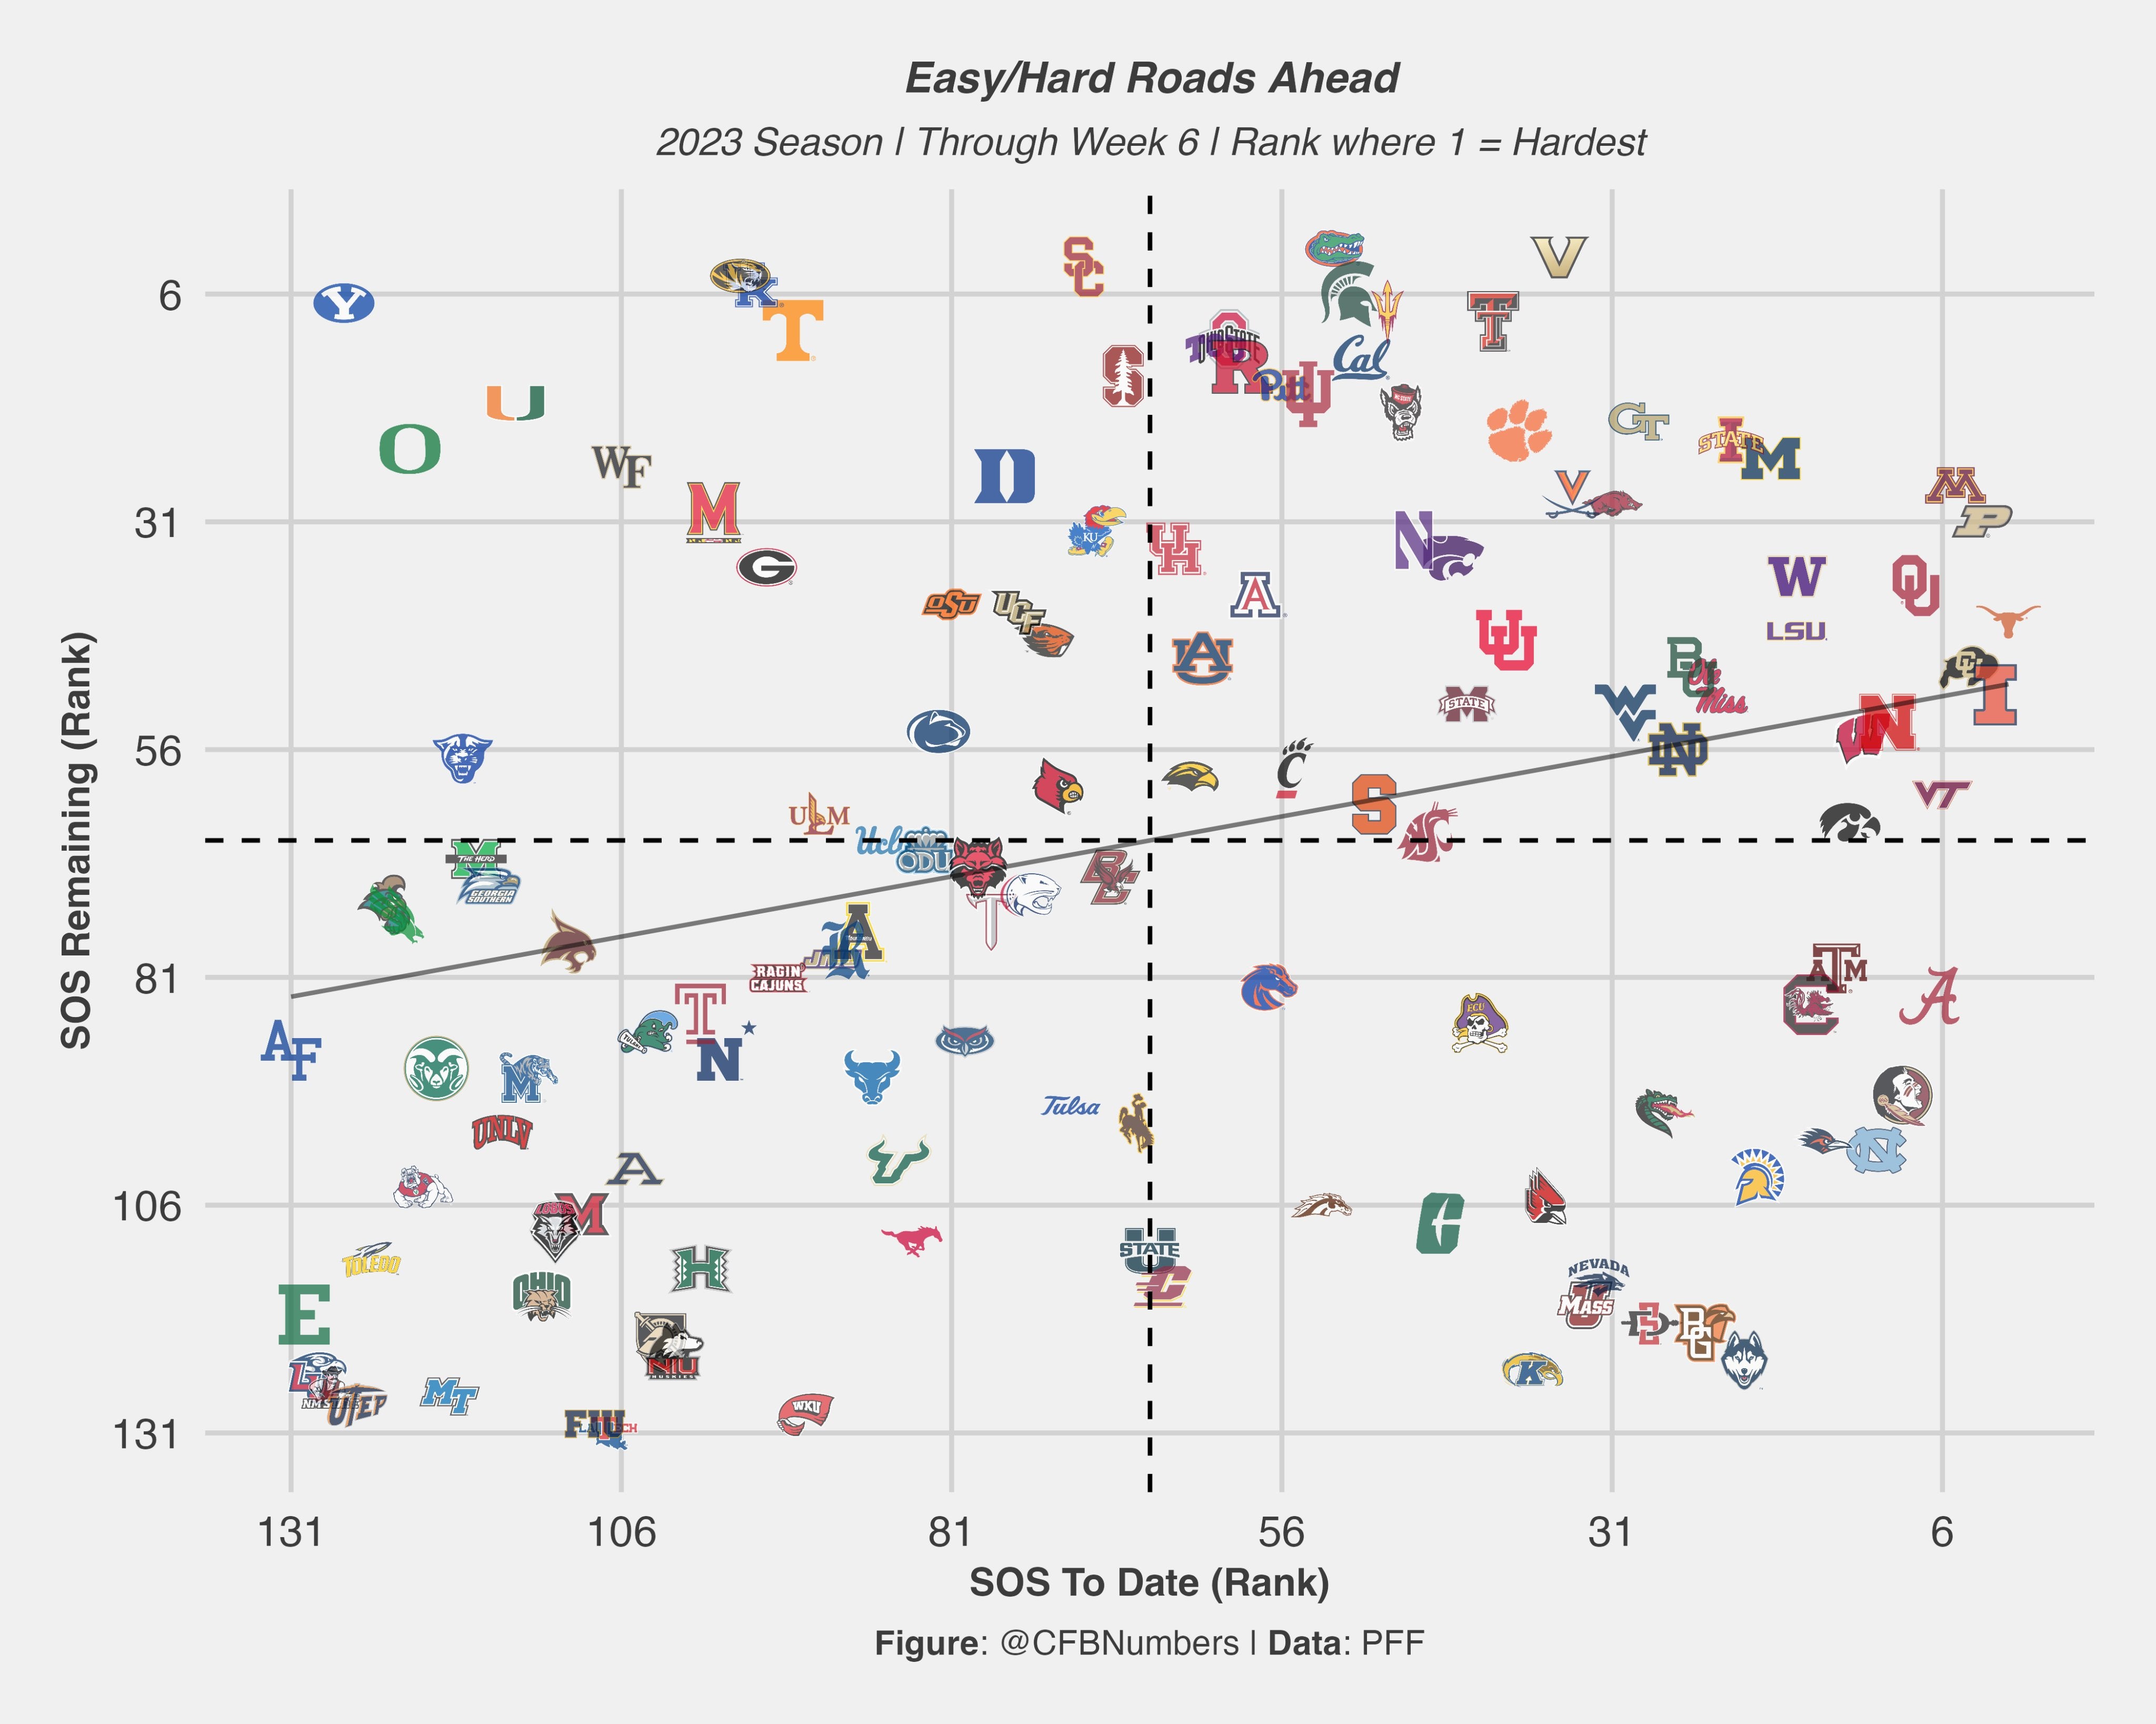 PFF NCAAF and SBC Strength of Schedule